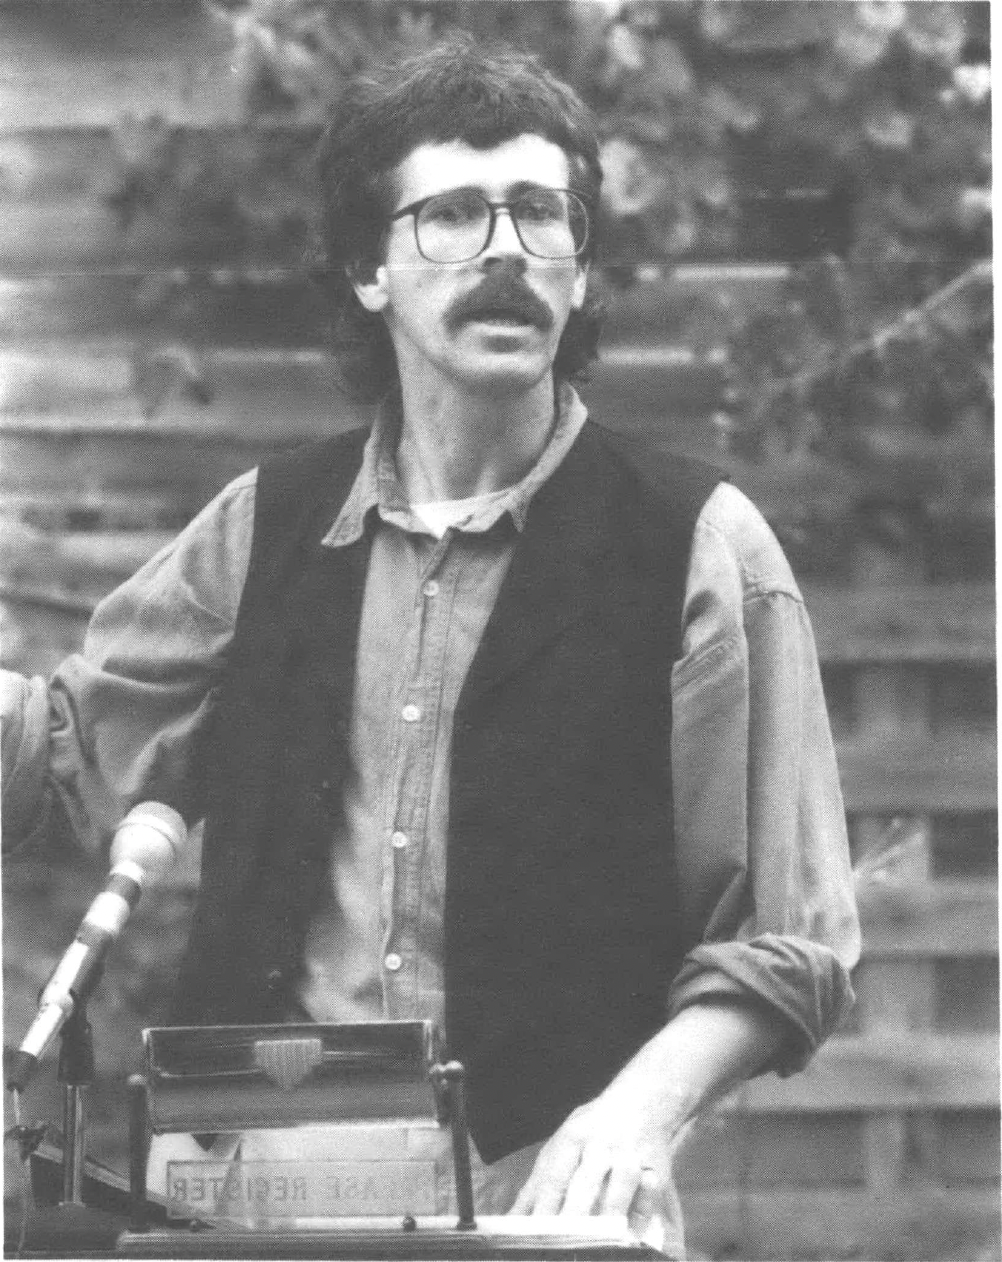 Action shot of man with '70s glasses, hair, and mustache